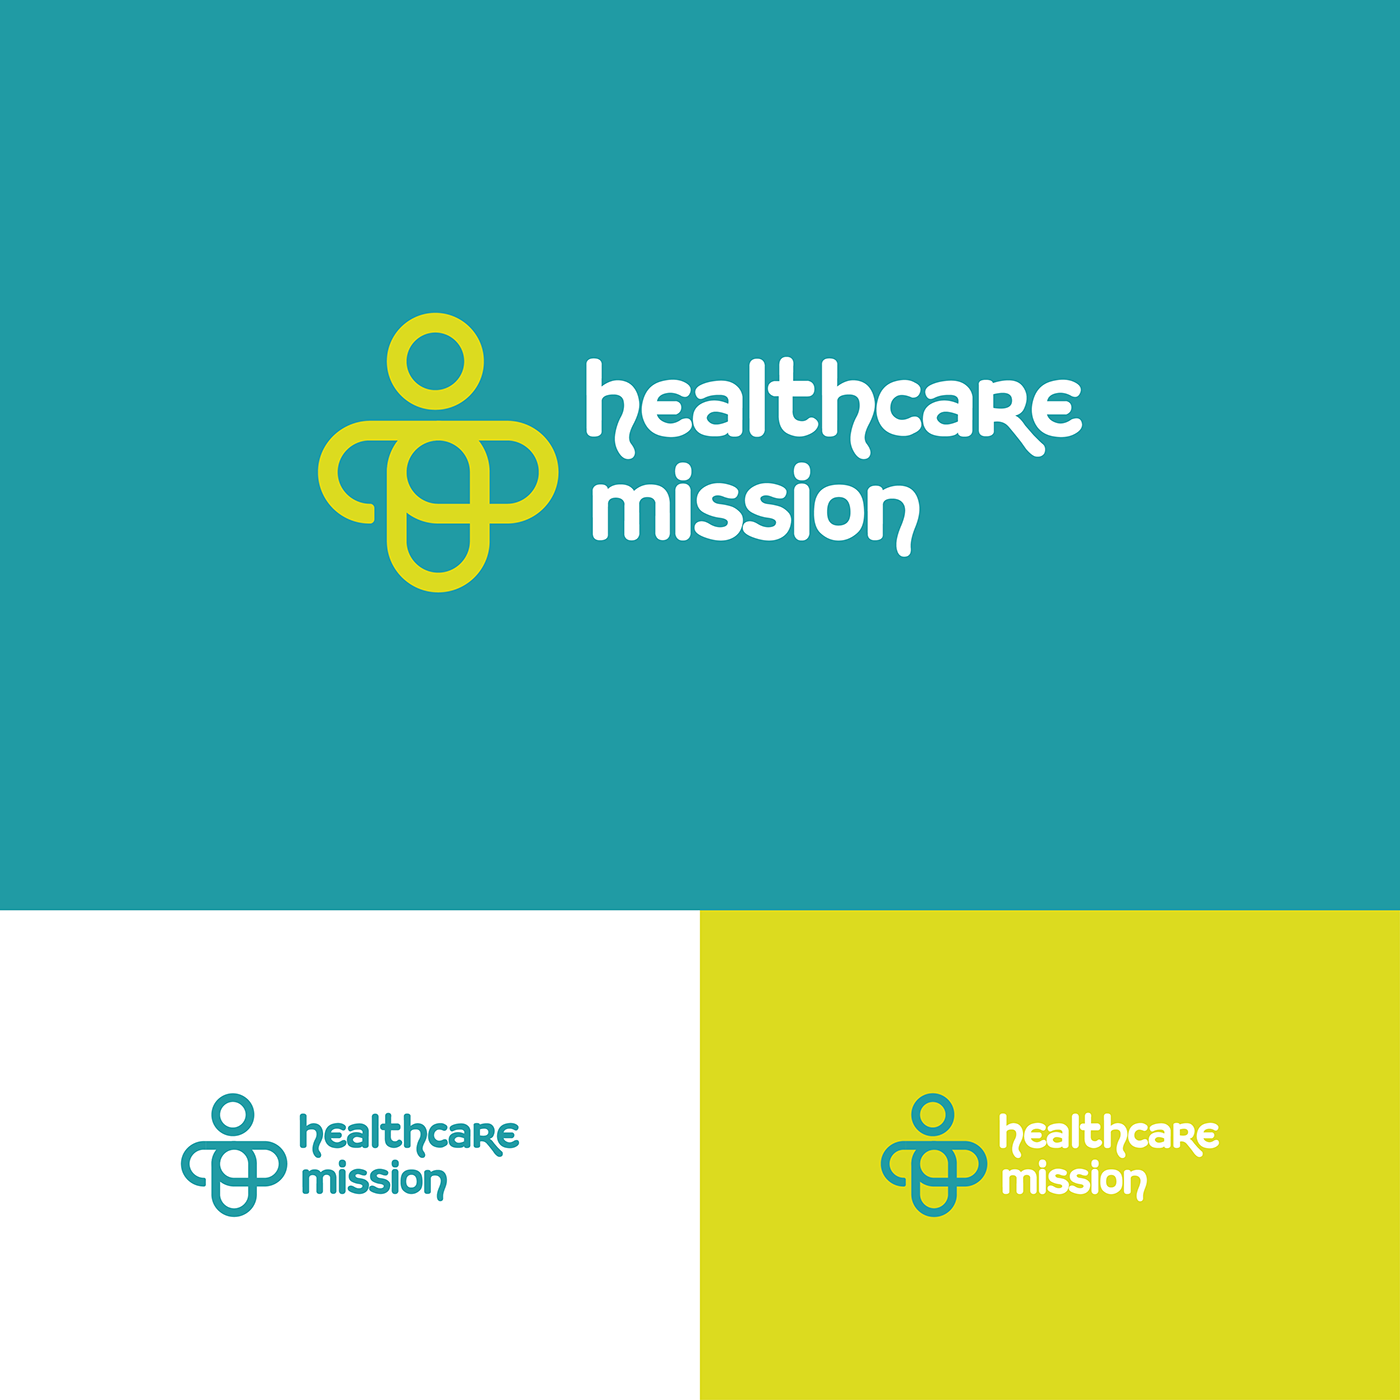 Image contains healthcare mission NGO charity logo